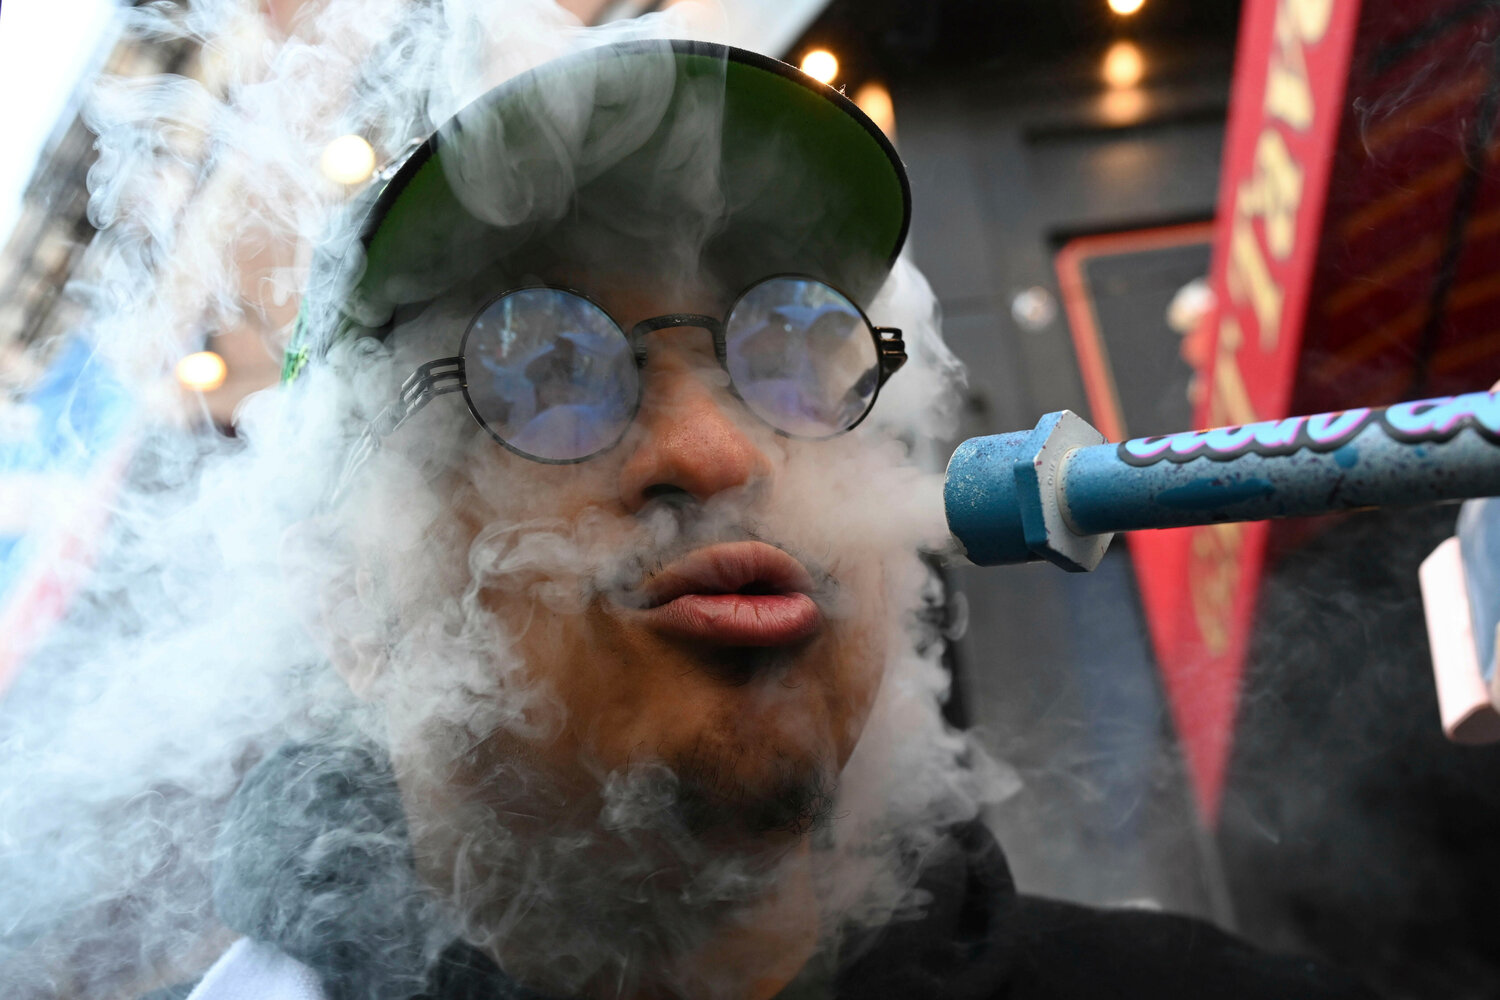 Toking shortly after the Jan. 24 opening of Smacked LLC, on Bleecker Street in Greenwich Village, the first New York cannabis dispensary owned by a justice-impacted individual.